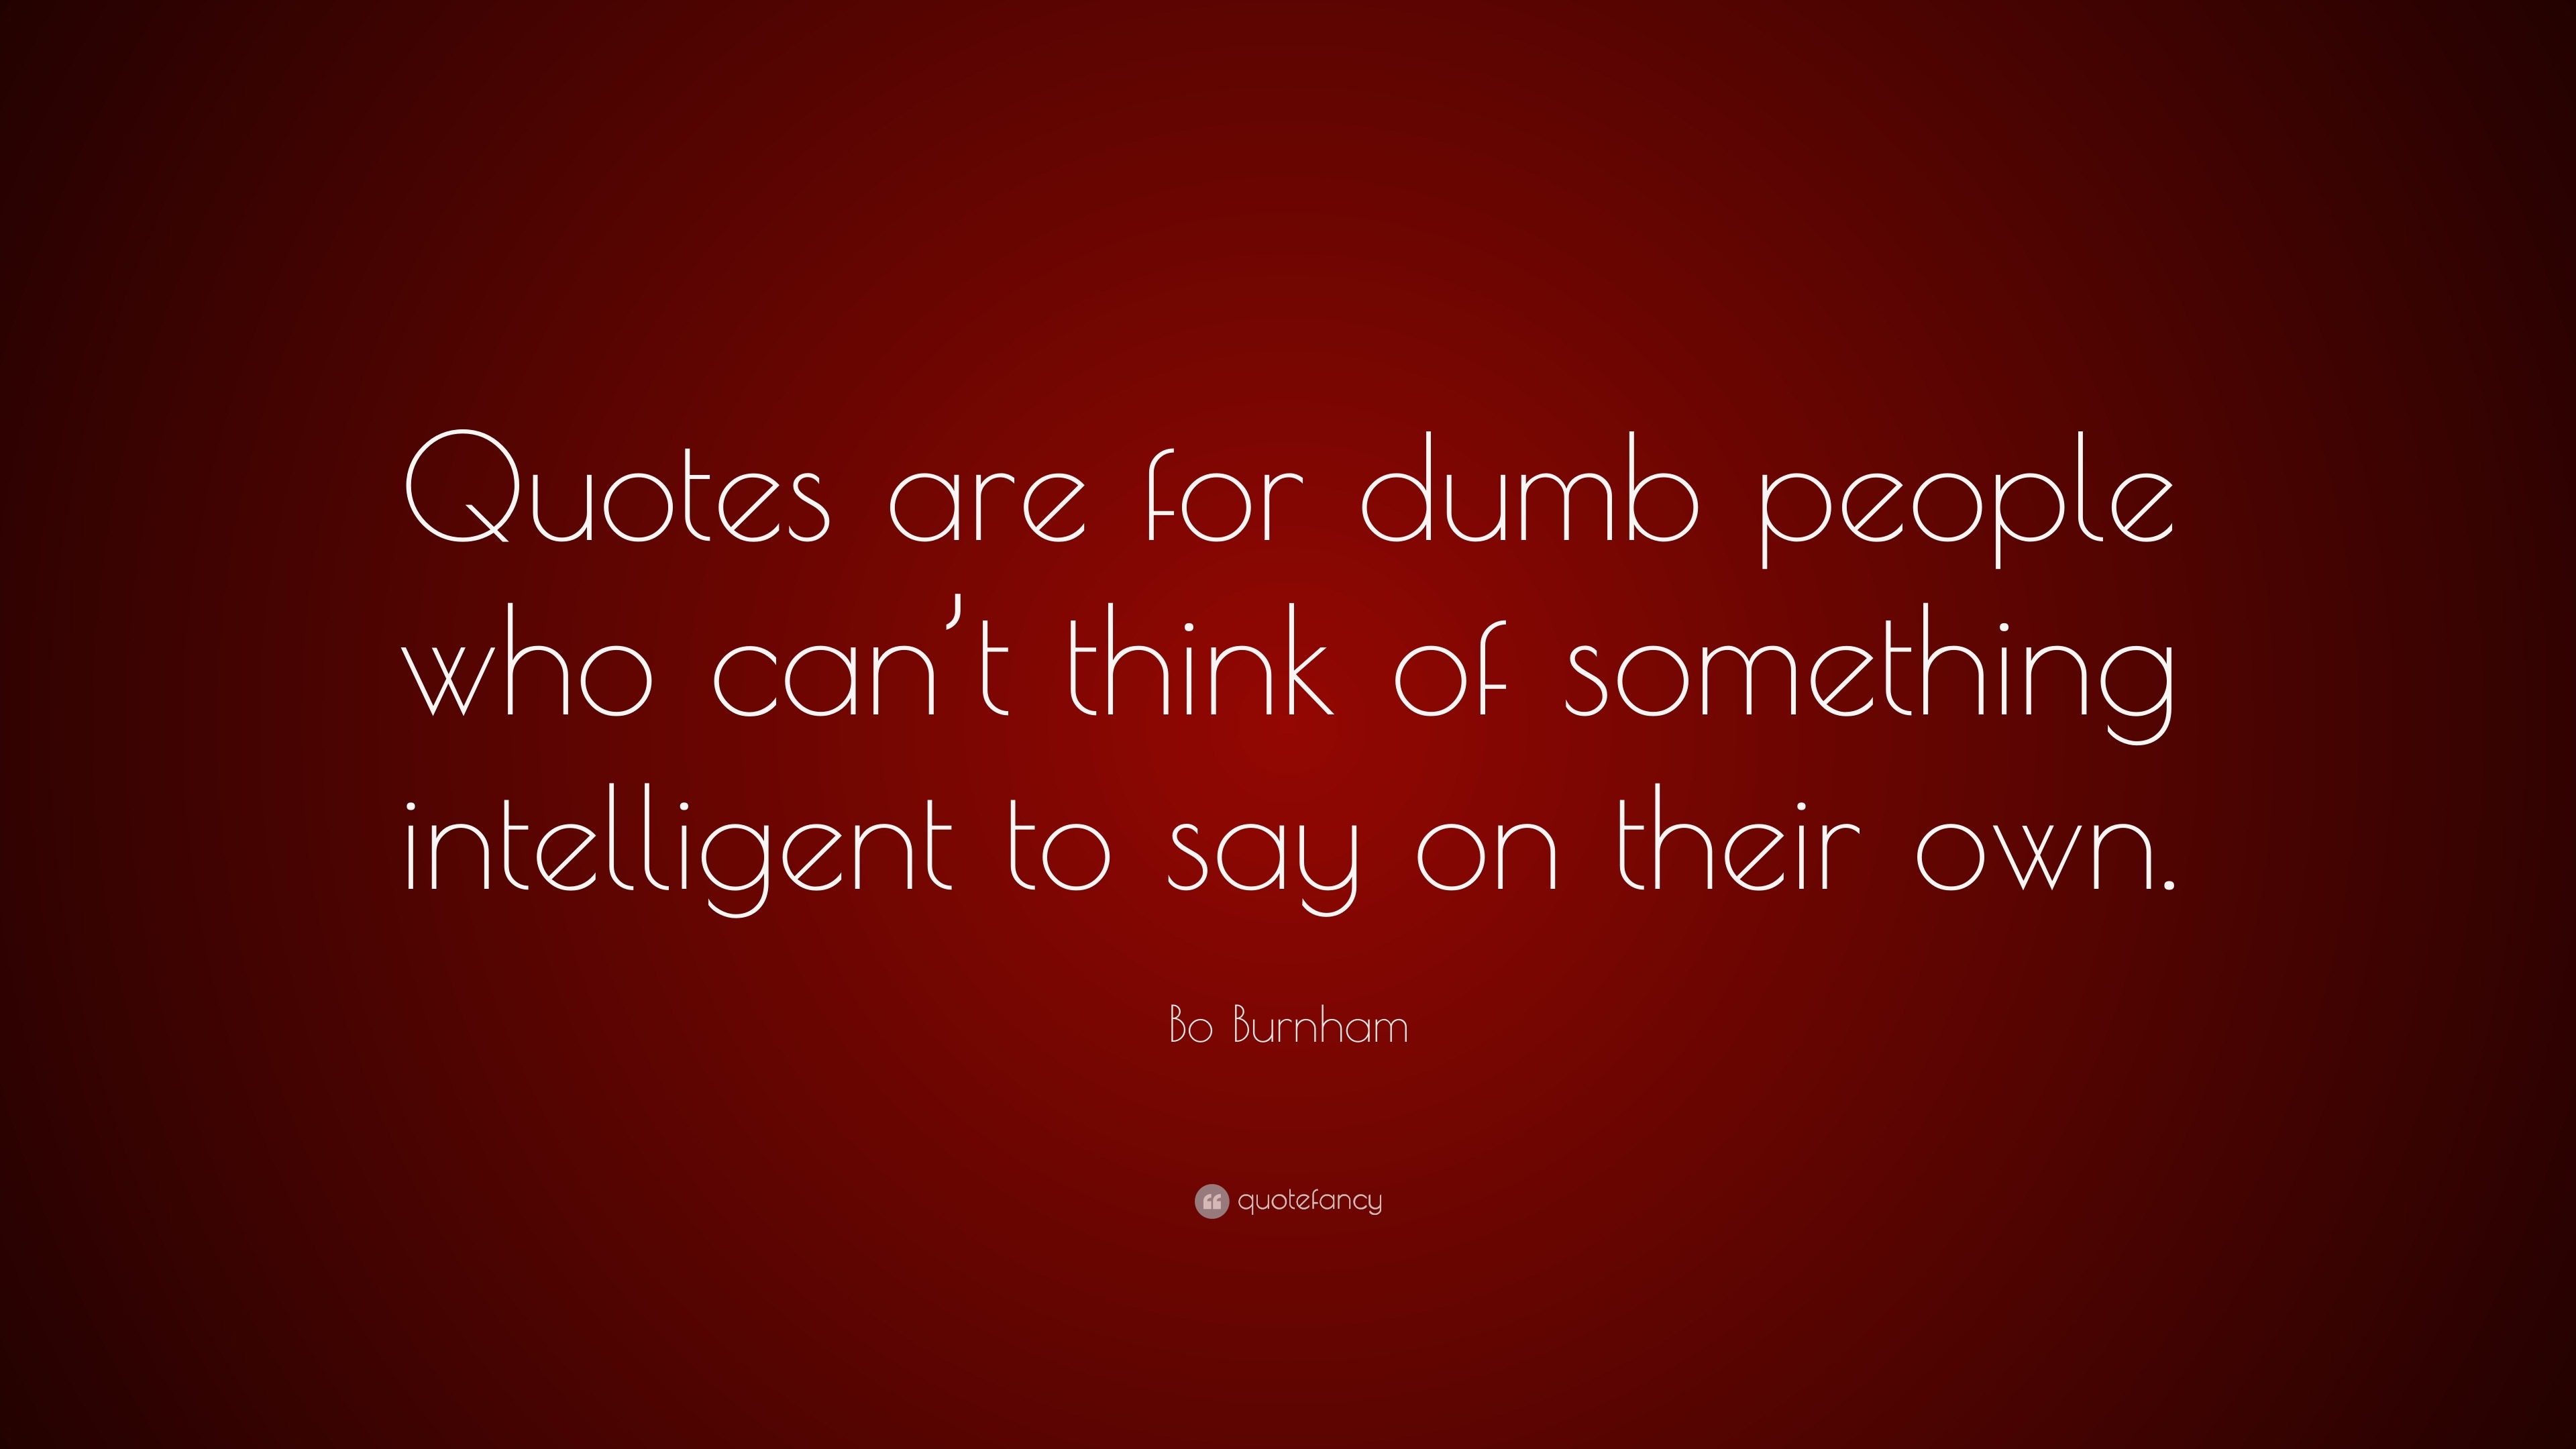 Best Dumb Quotes That Sound Deep of all time The ultimate guide 